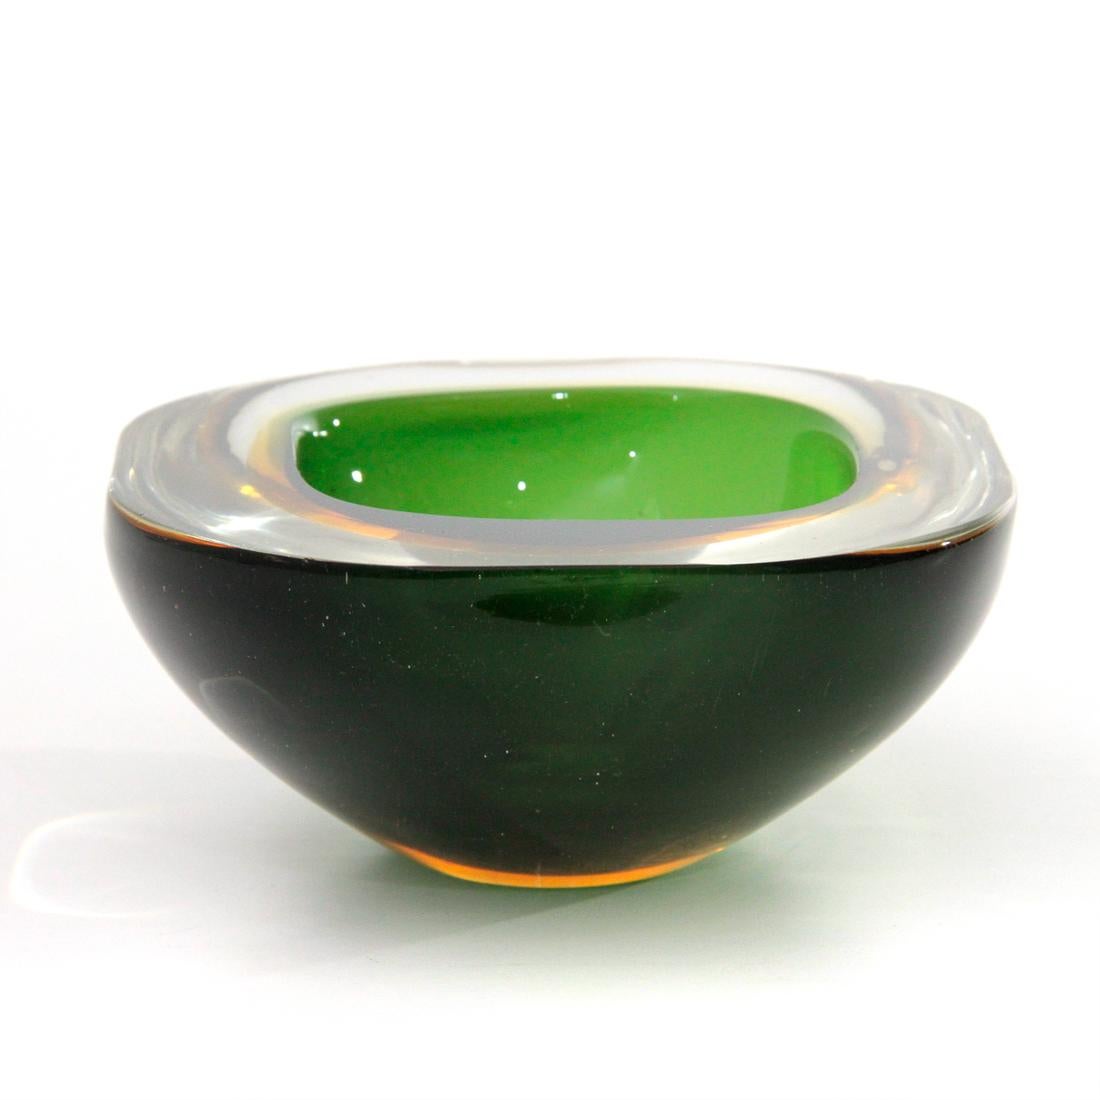 Bowl of Italian manufacture produced in the 1960s.
Murano glass submerged in the colors of green and orange.
Good general conditions, some signs due to normal use over time.

Dimensions: Diameter 15 cm, height 7 cm.
 